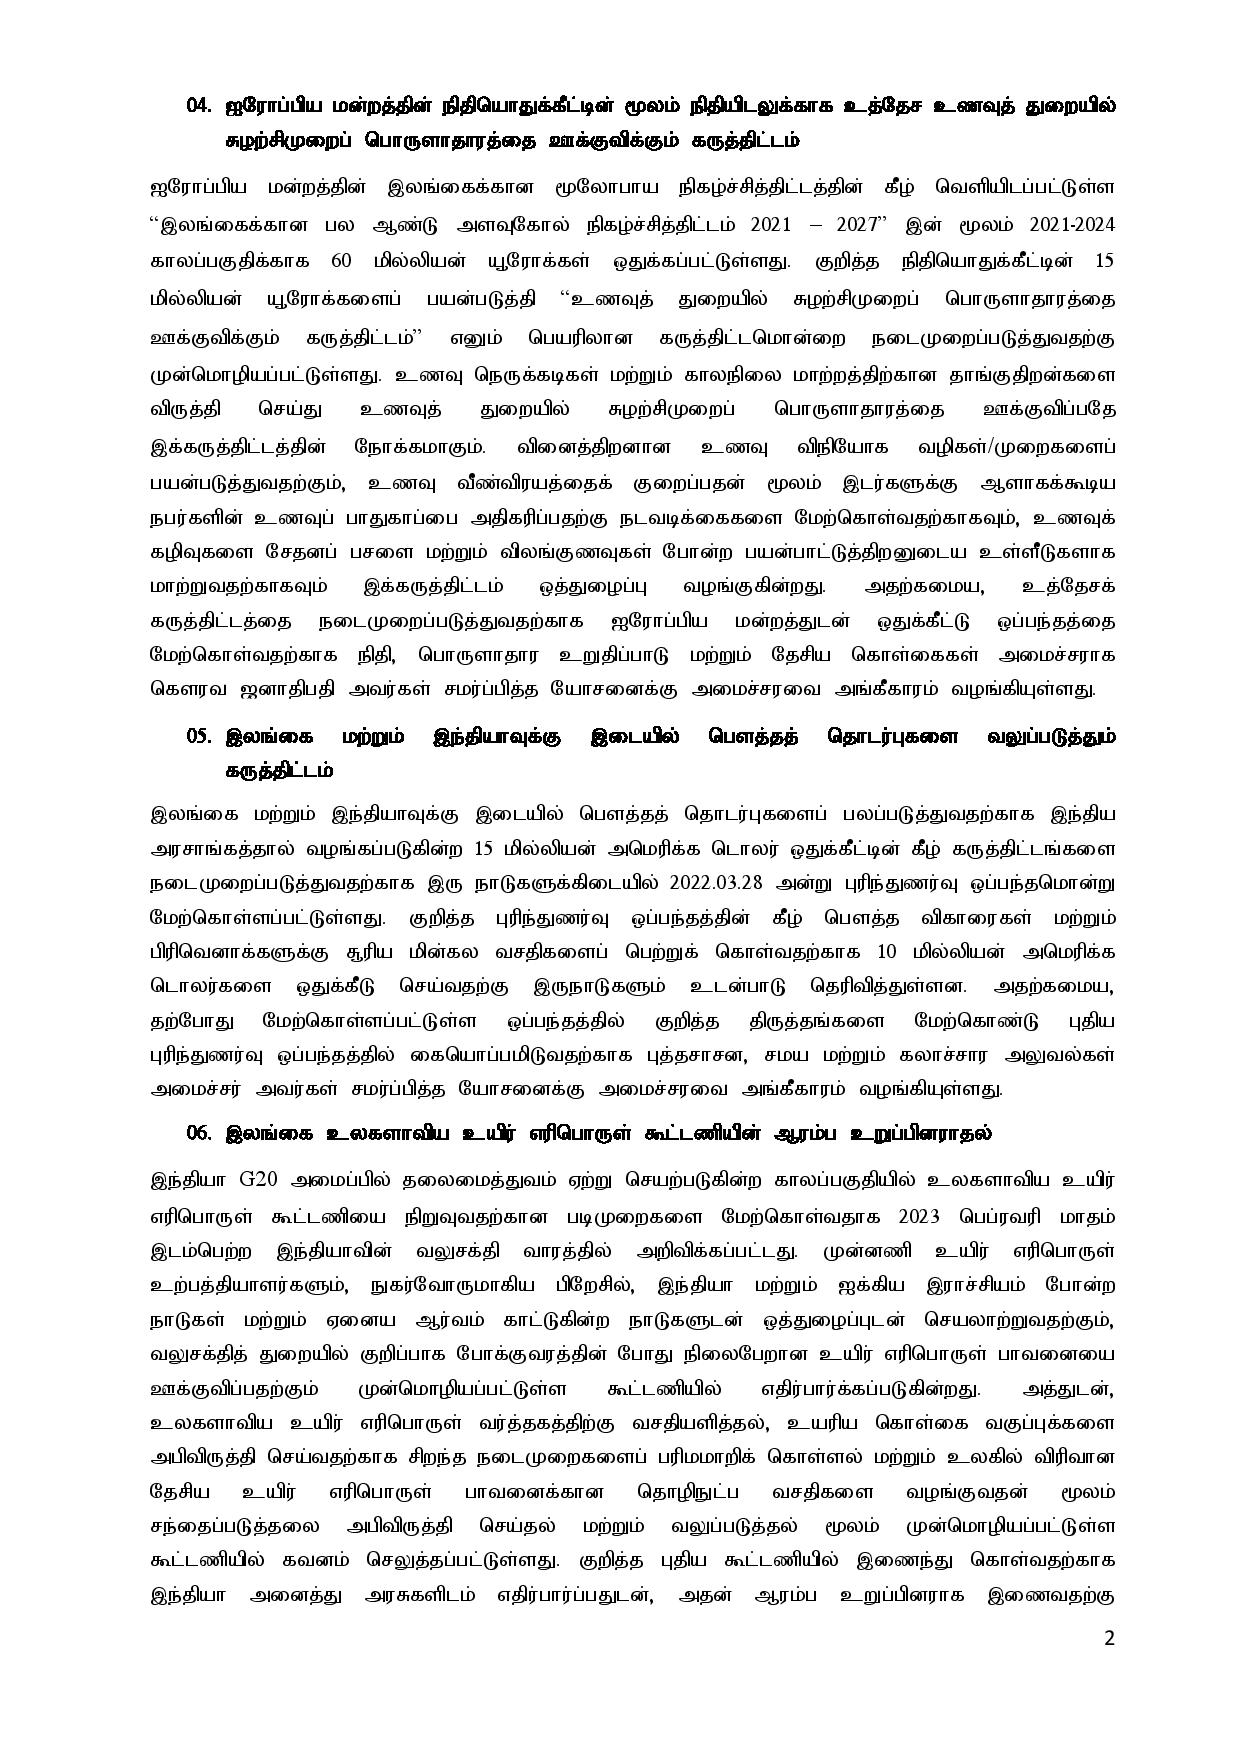 Cabinet Decisions on 17.07.2023 Tamil page 002